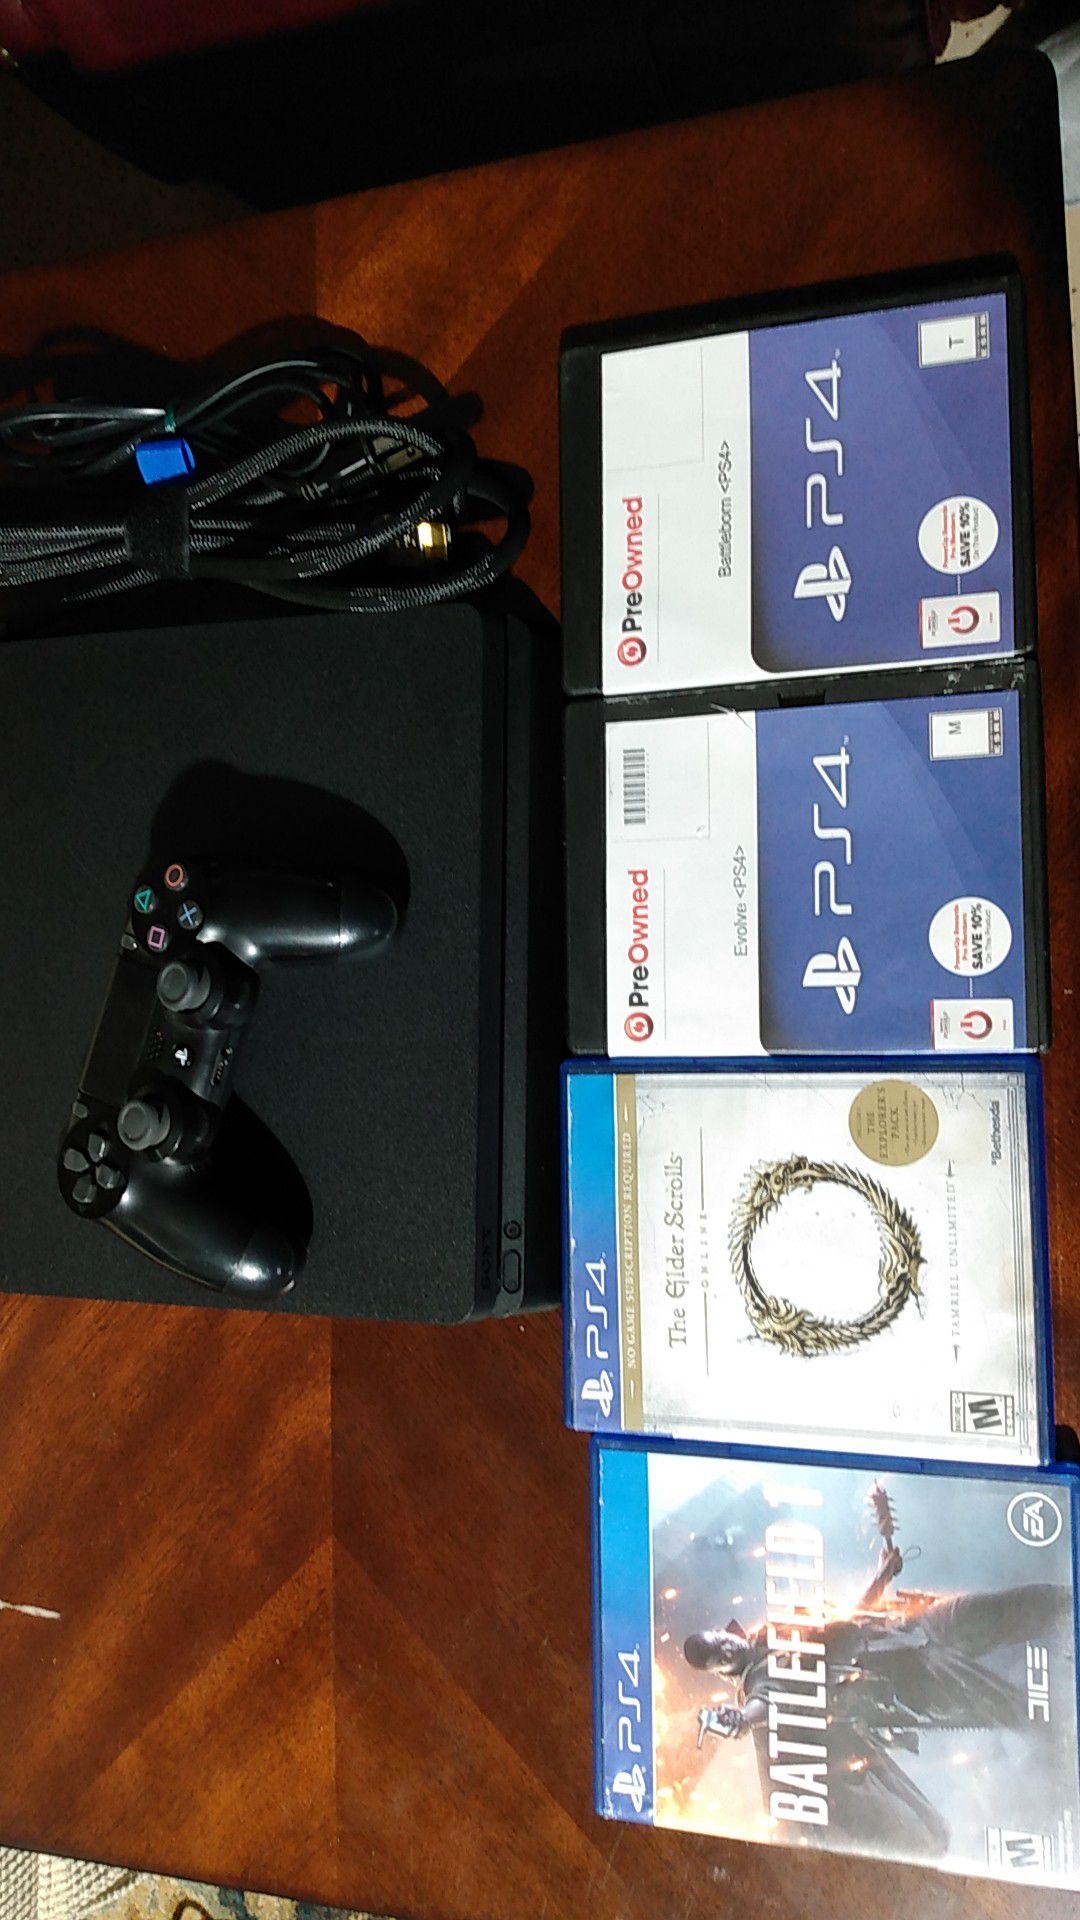 PS4 with 1 controller all the cables and 4 game for 210